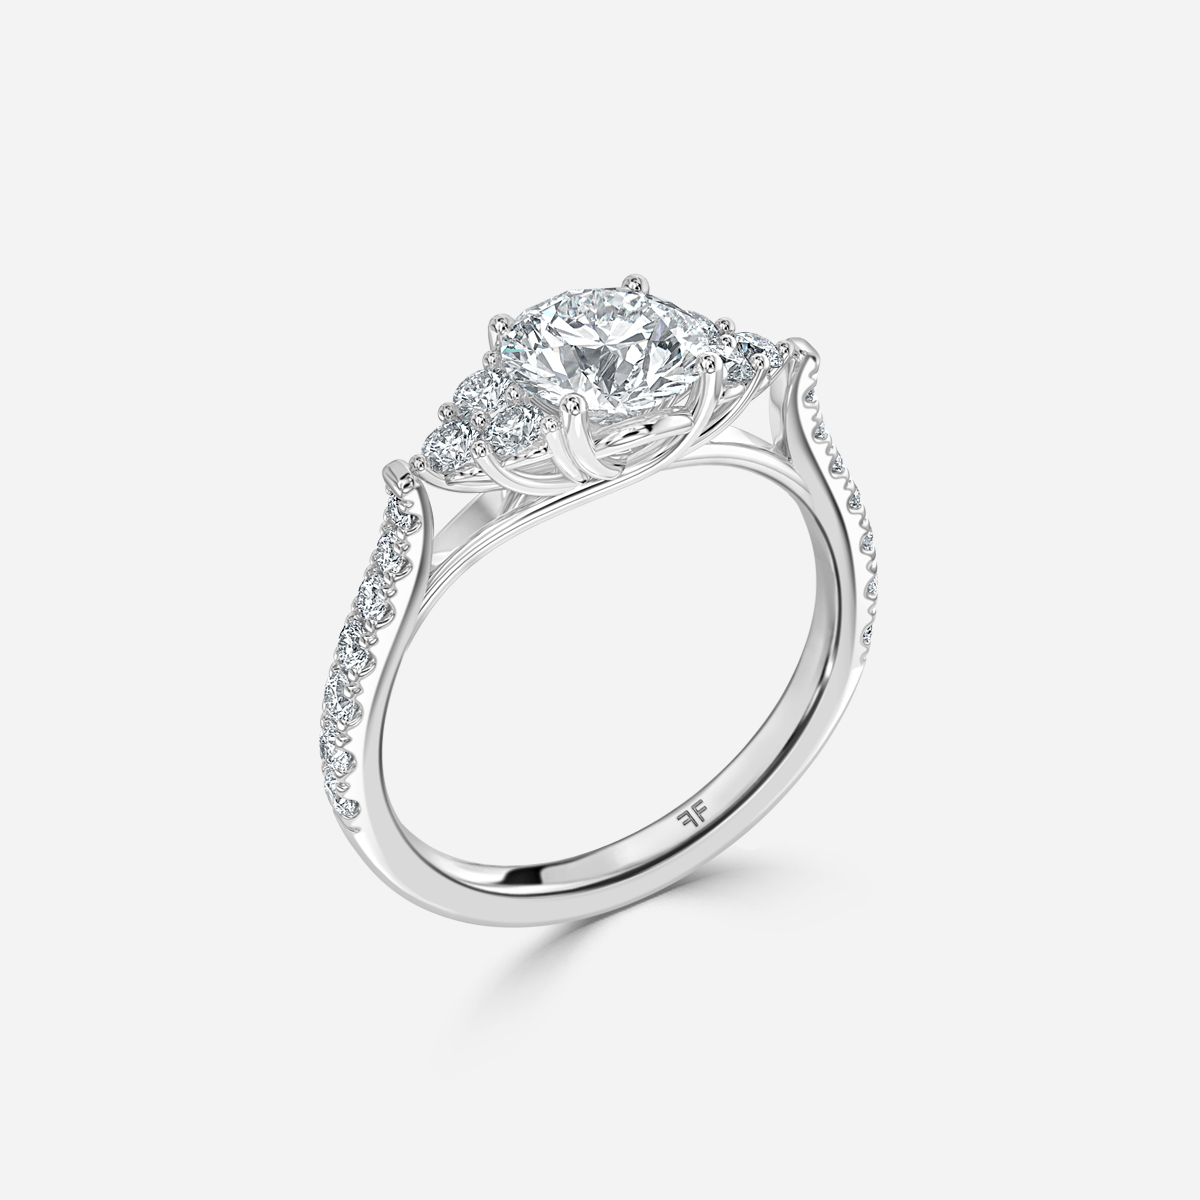 Mithrial White Gold Trilogy Engagement Ring